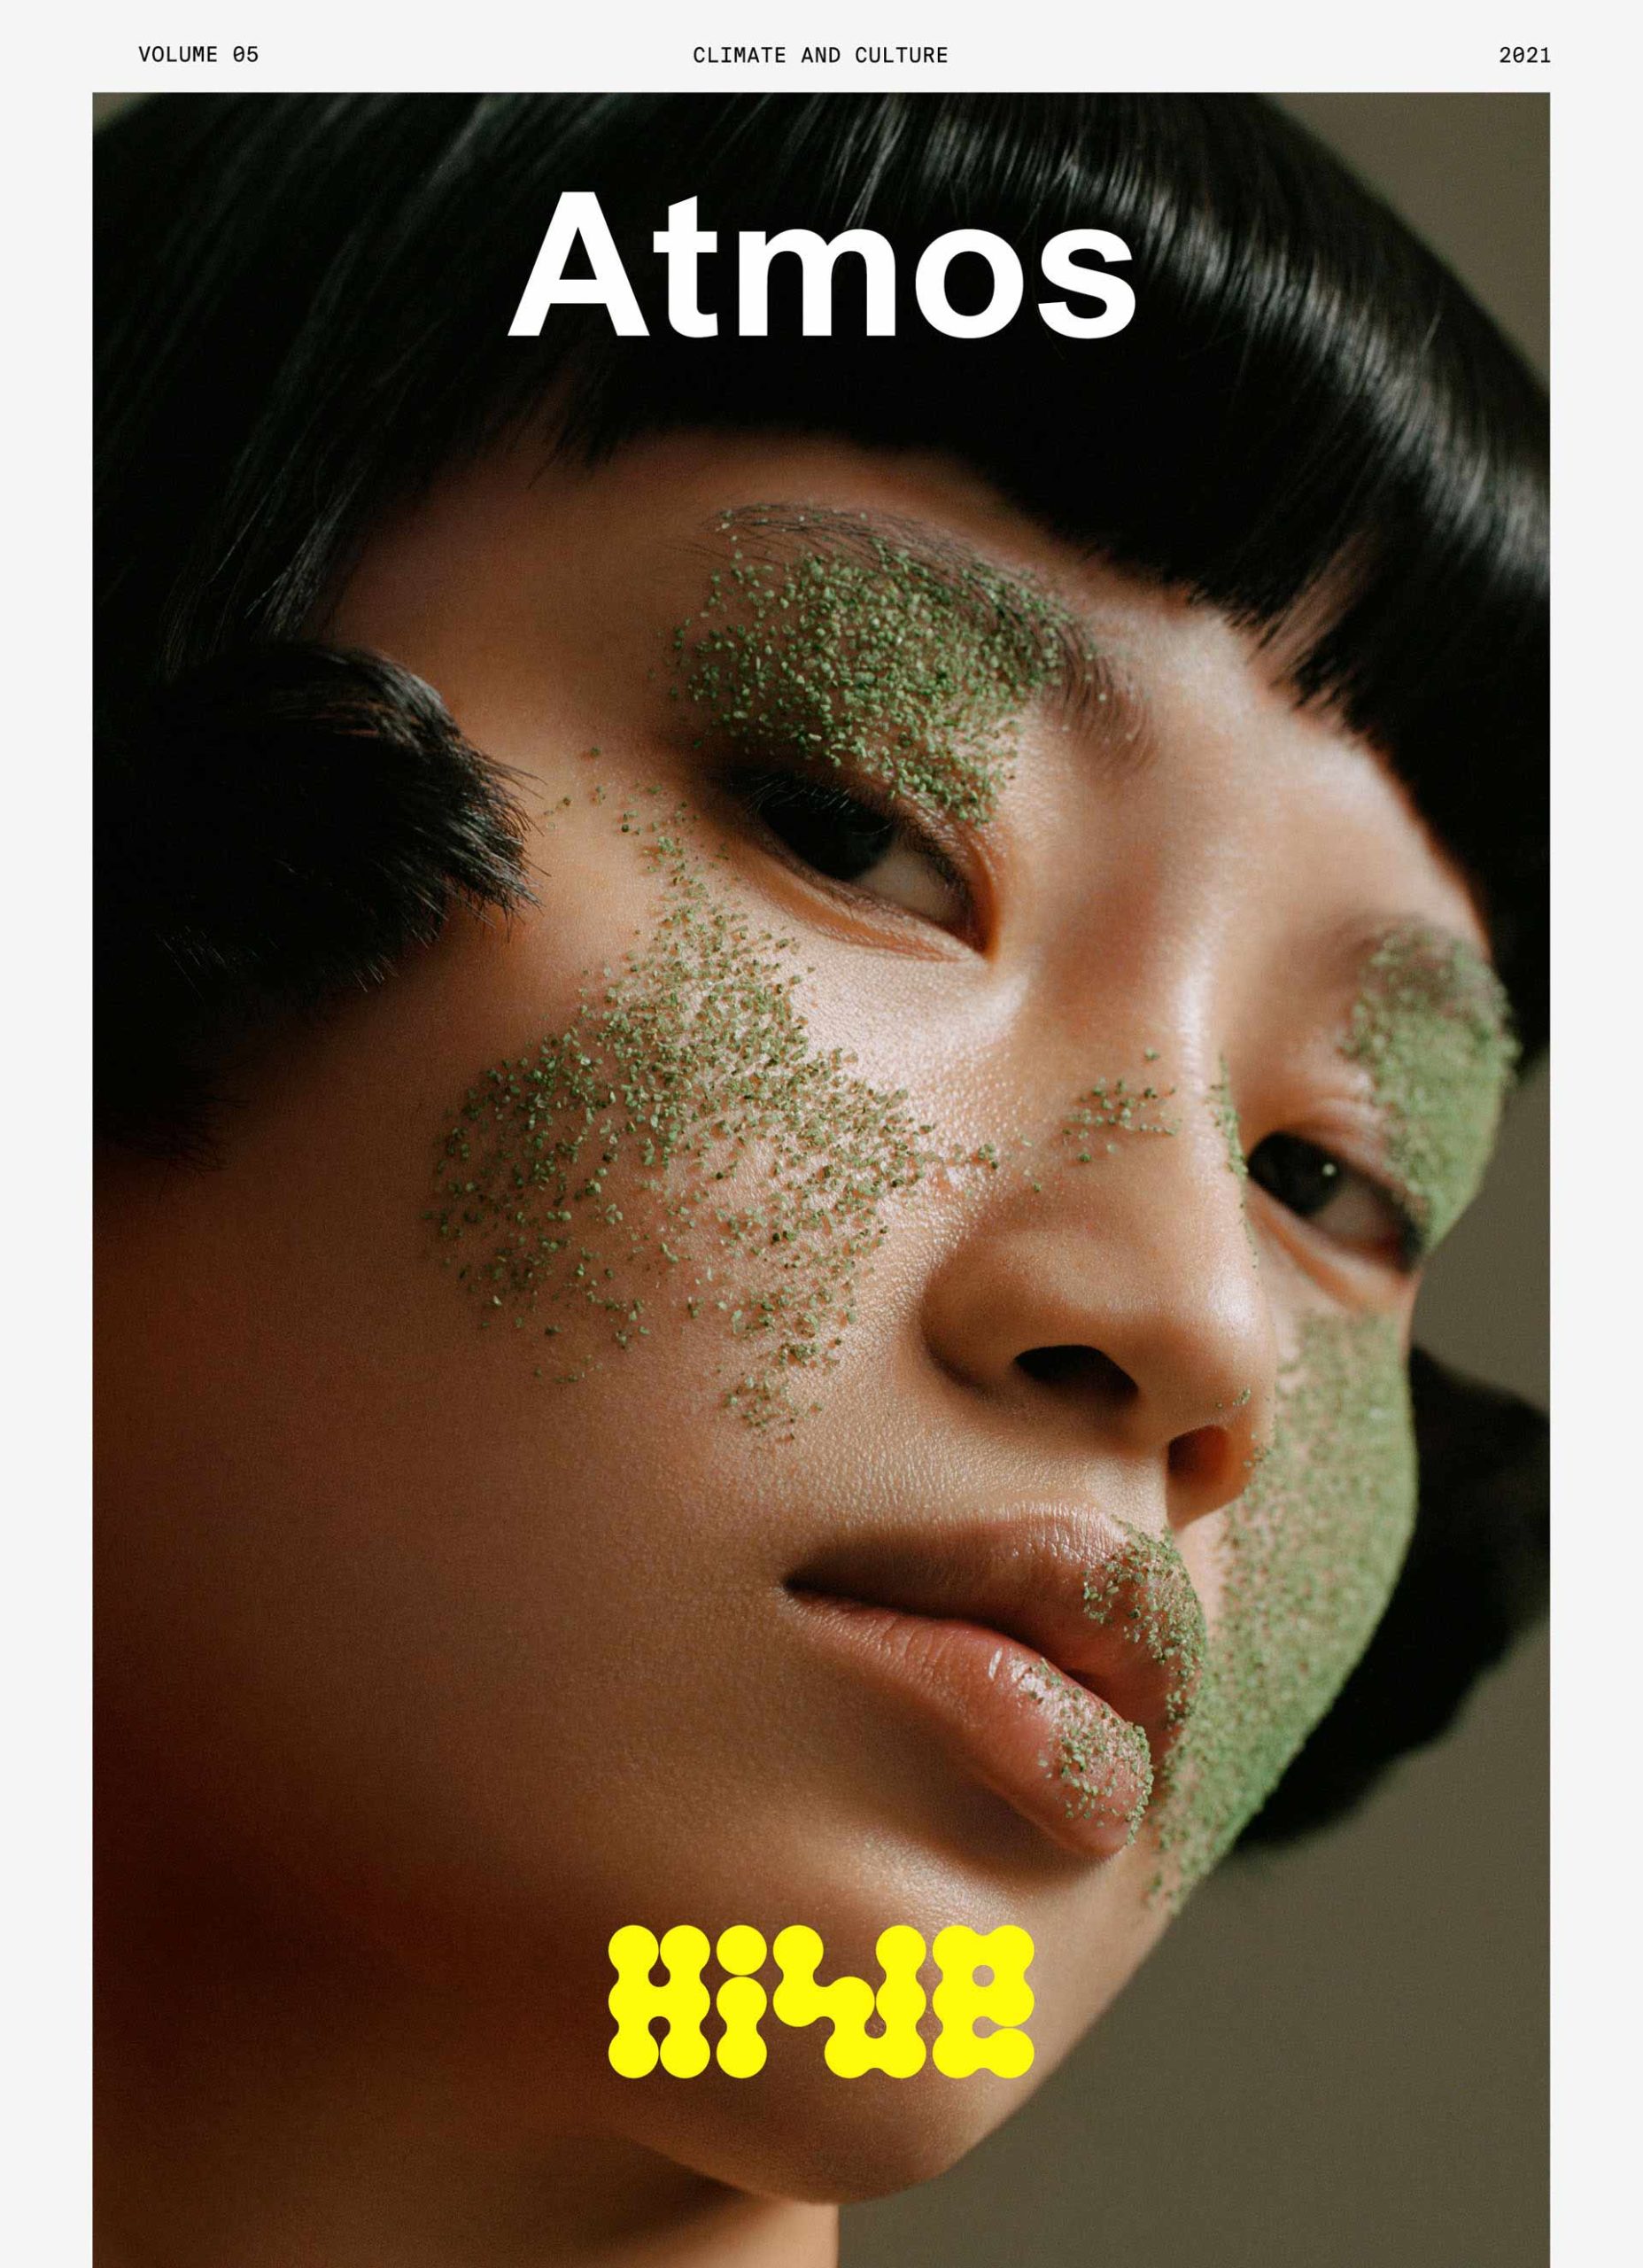 Atmos Vol. 5 Hive Is a Candid Portrait of Nature in Collaboration Atmos ‘Hive’ cover 06 by Ben Toms